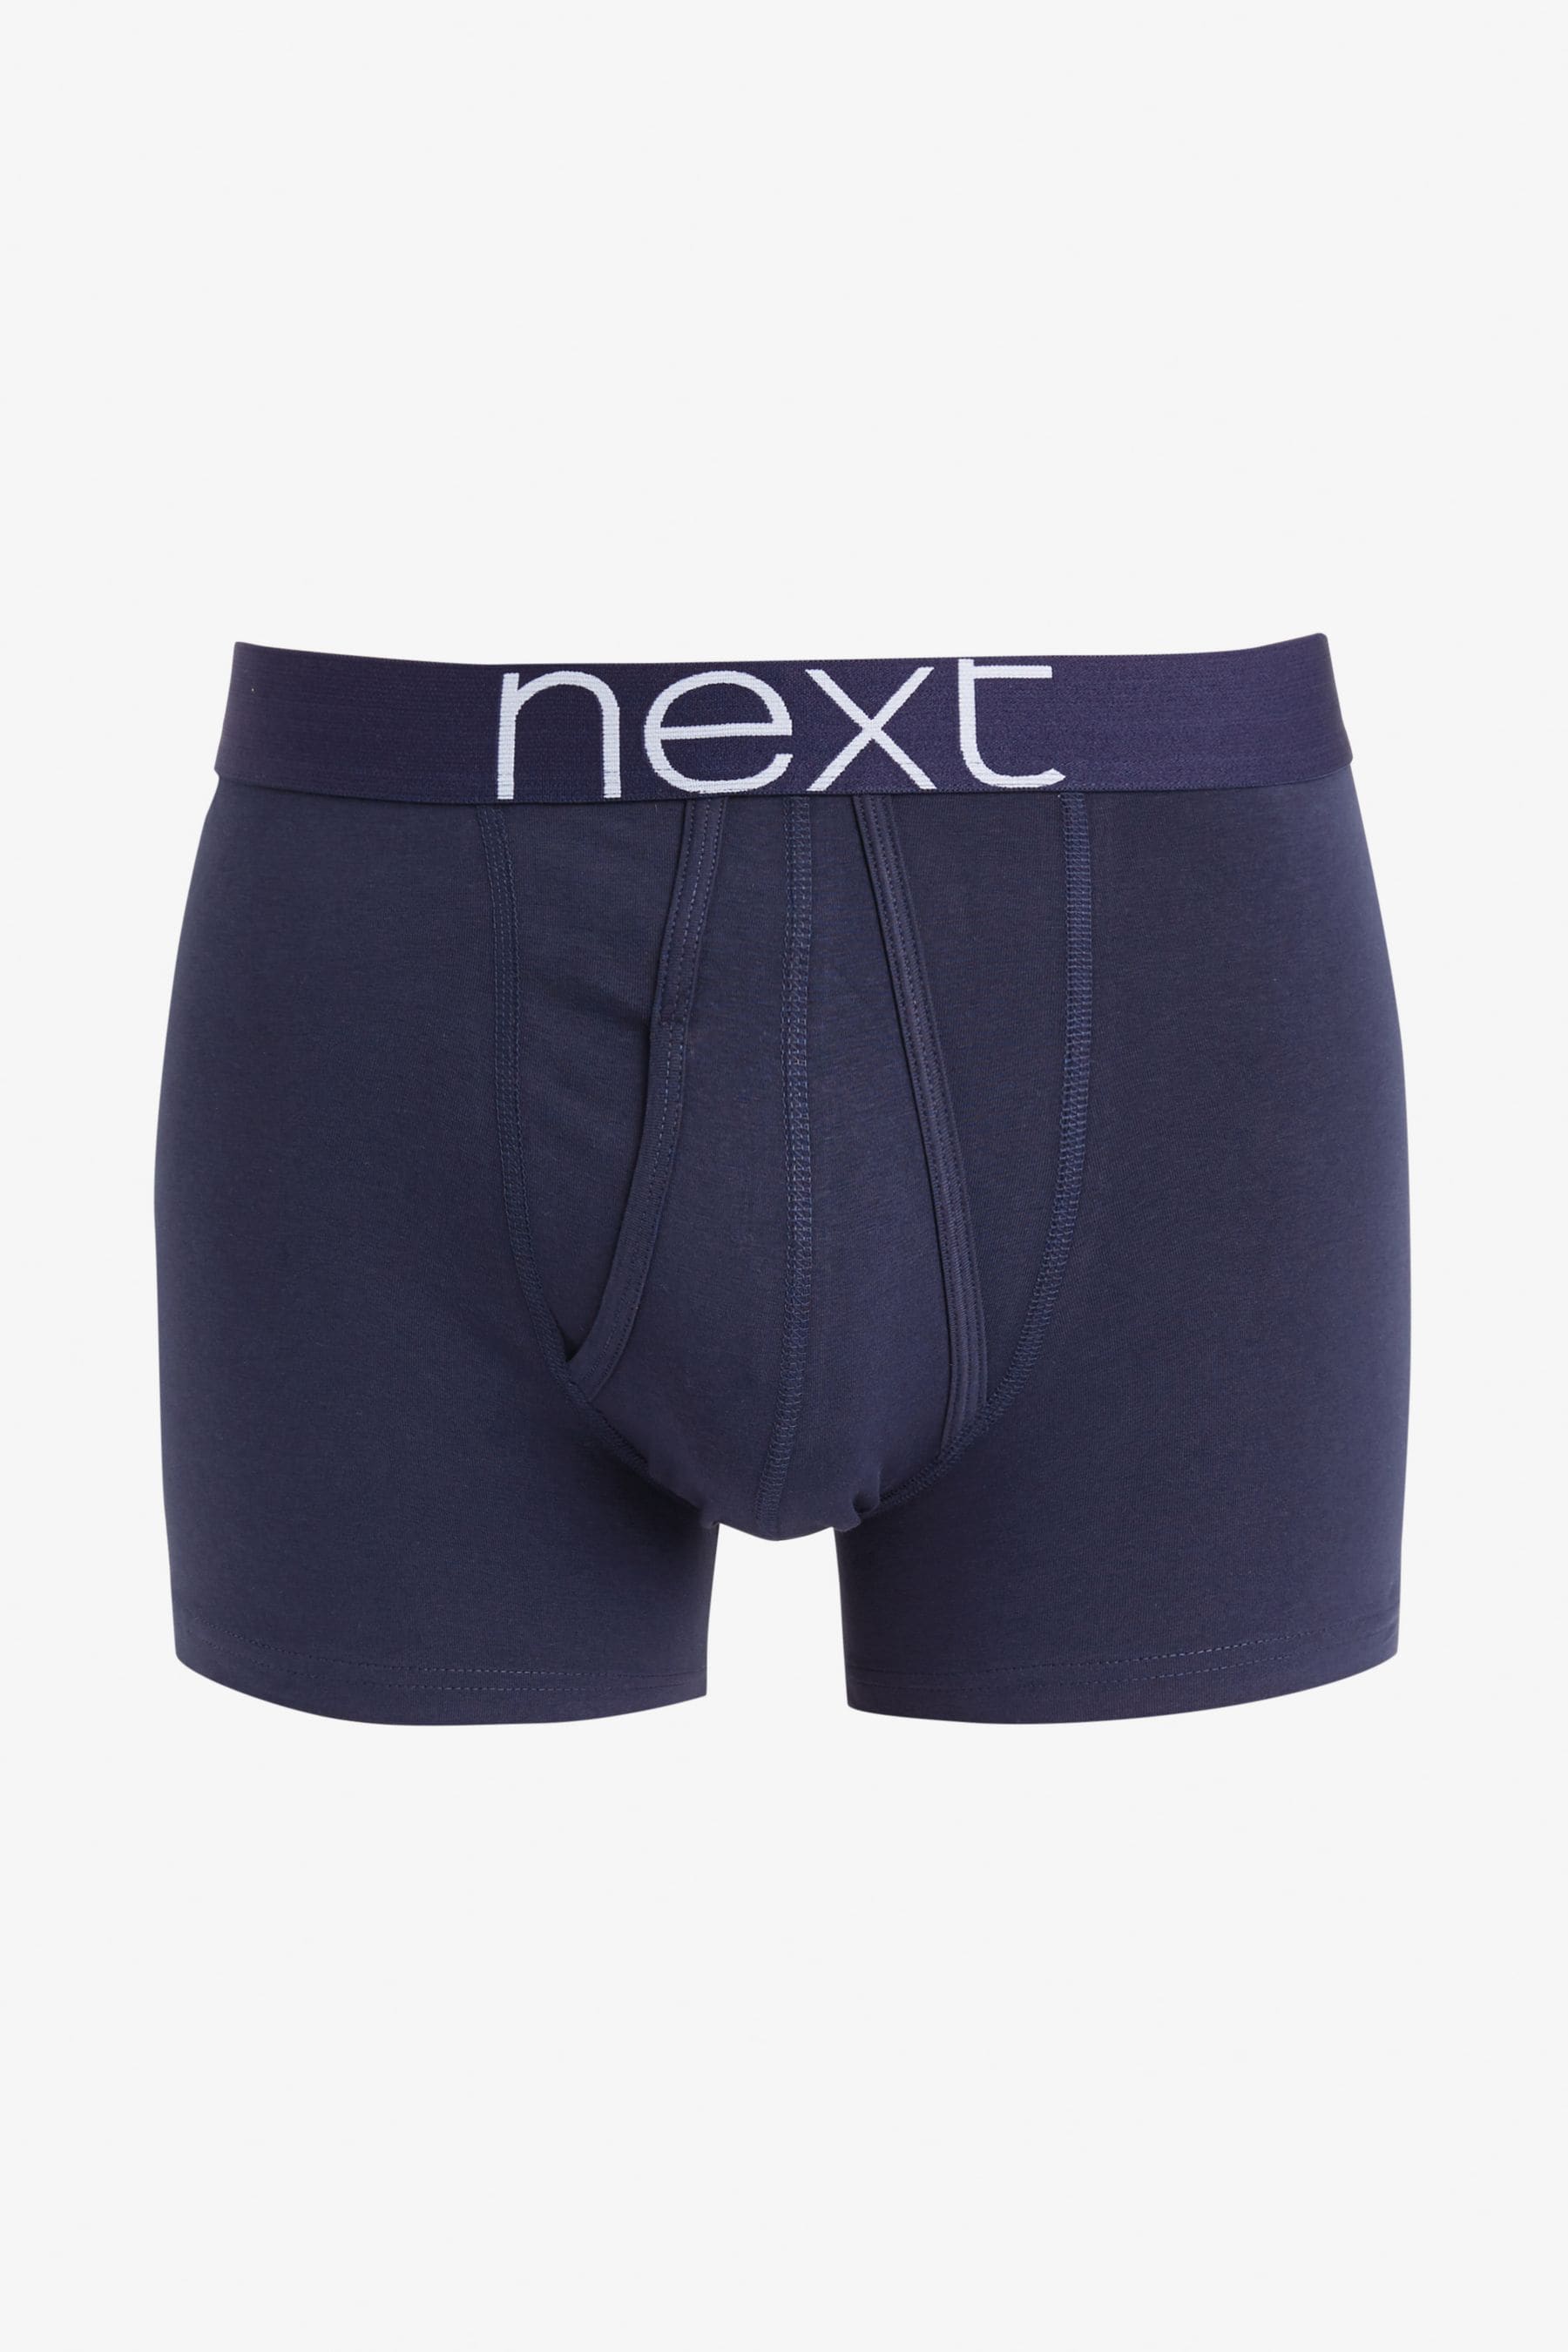 Buy Core Mixed Colour 10 pack A-Front Boxers from the Next UK online shop